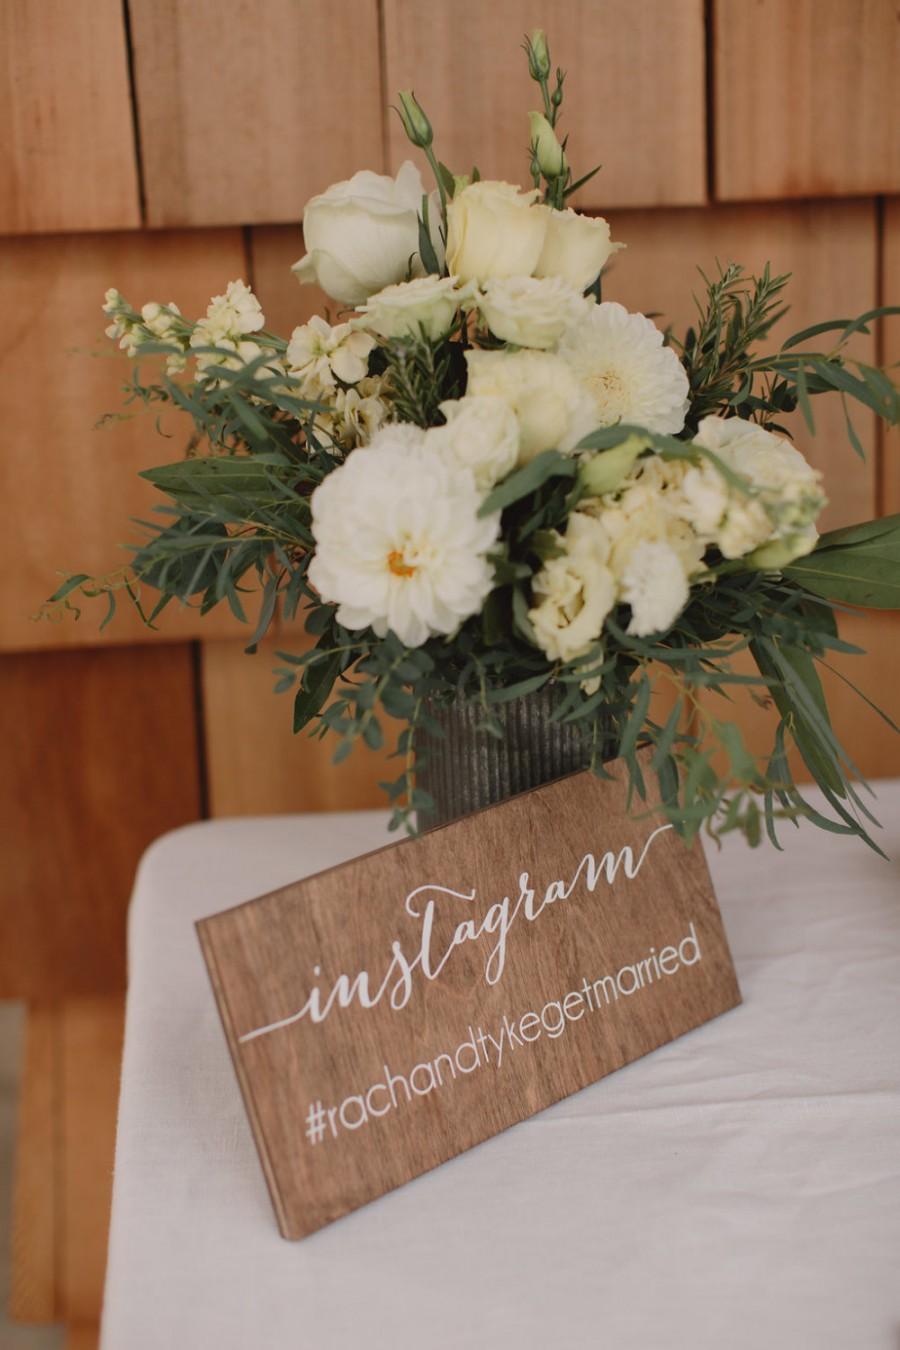 Mariage - Instagram - Social Media Sign - Hashtag - Wooden Wedding Signs - Wood